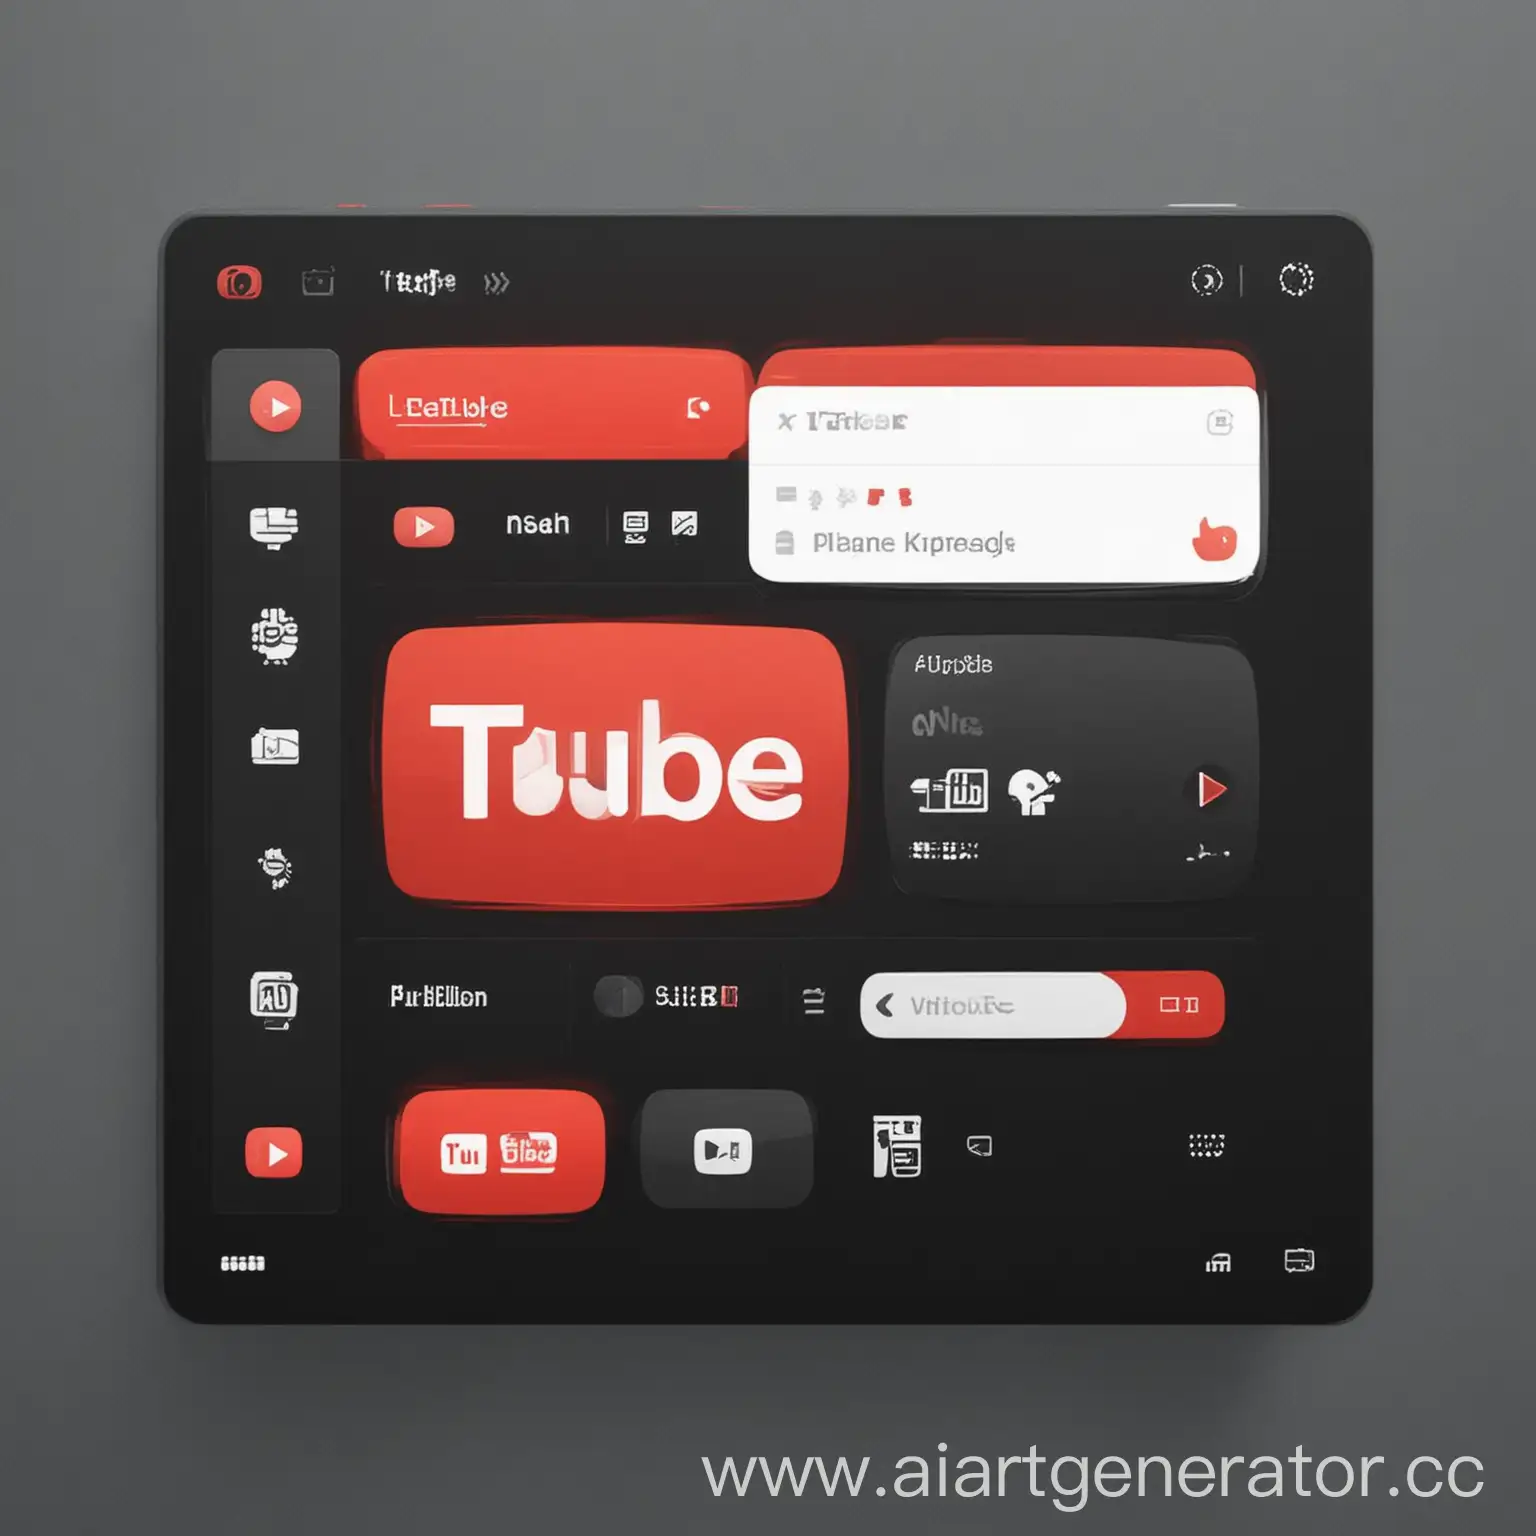 YouTube-App-Interface-in-Red-White-and-Black-Colors